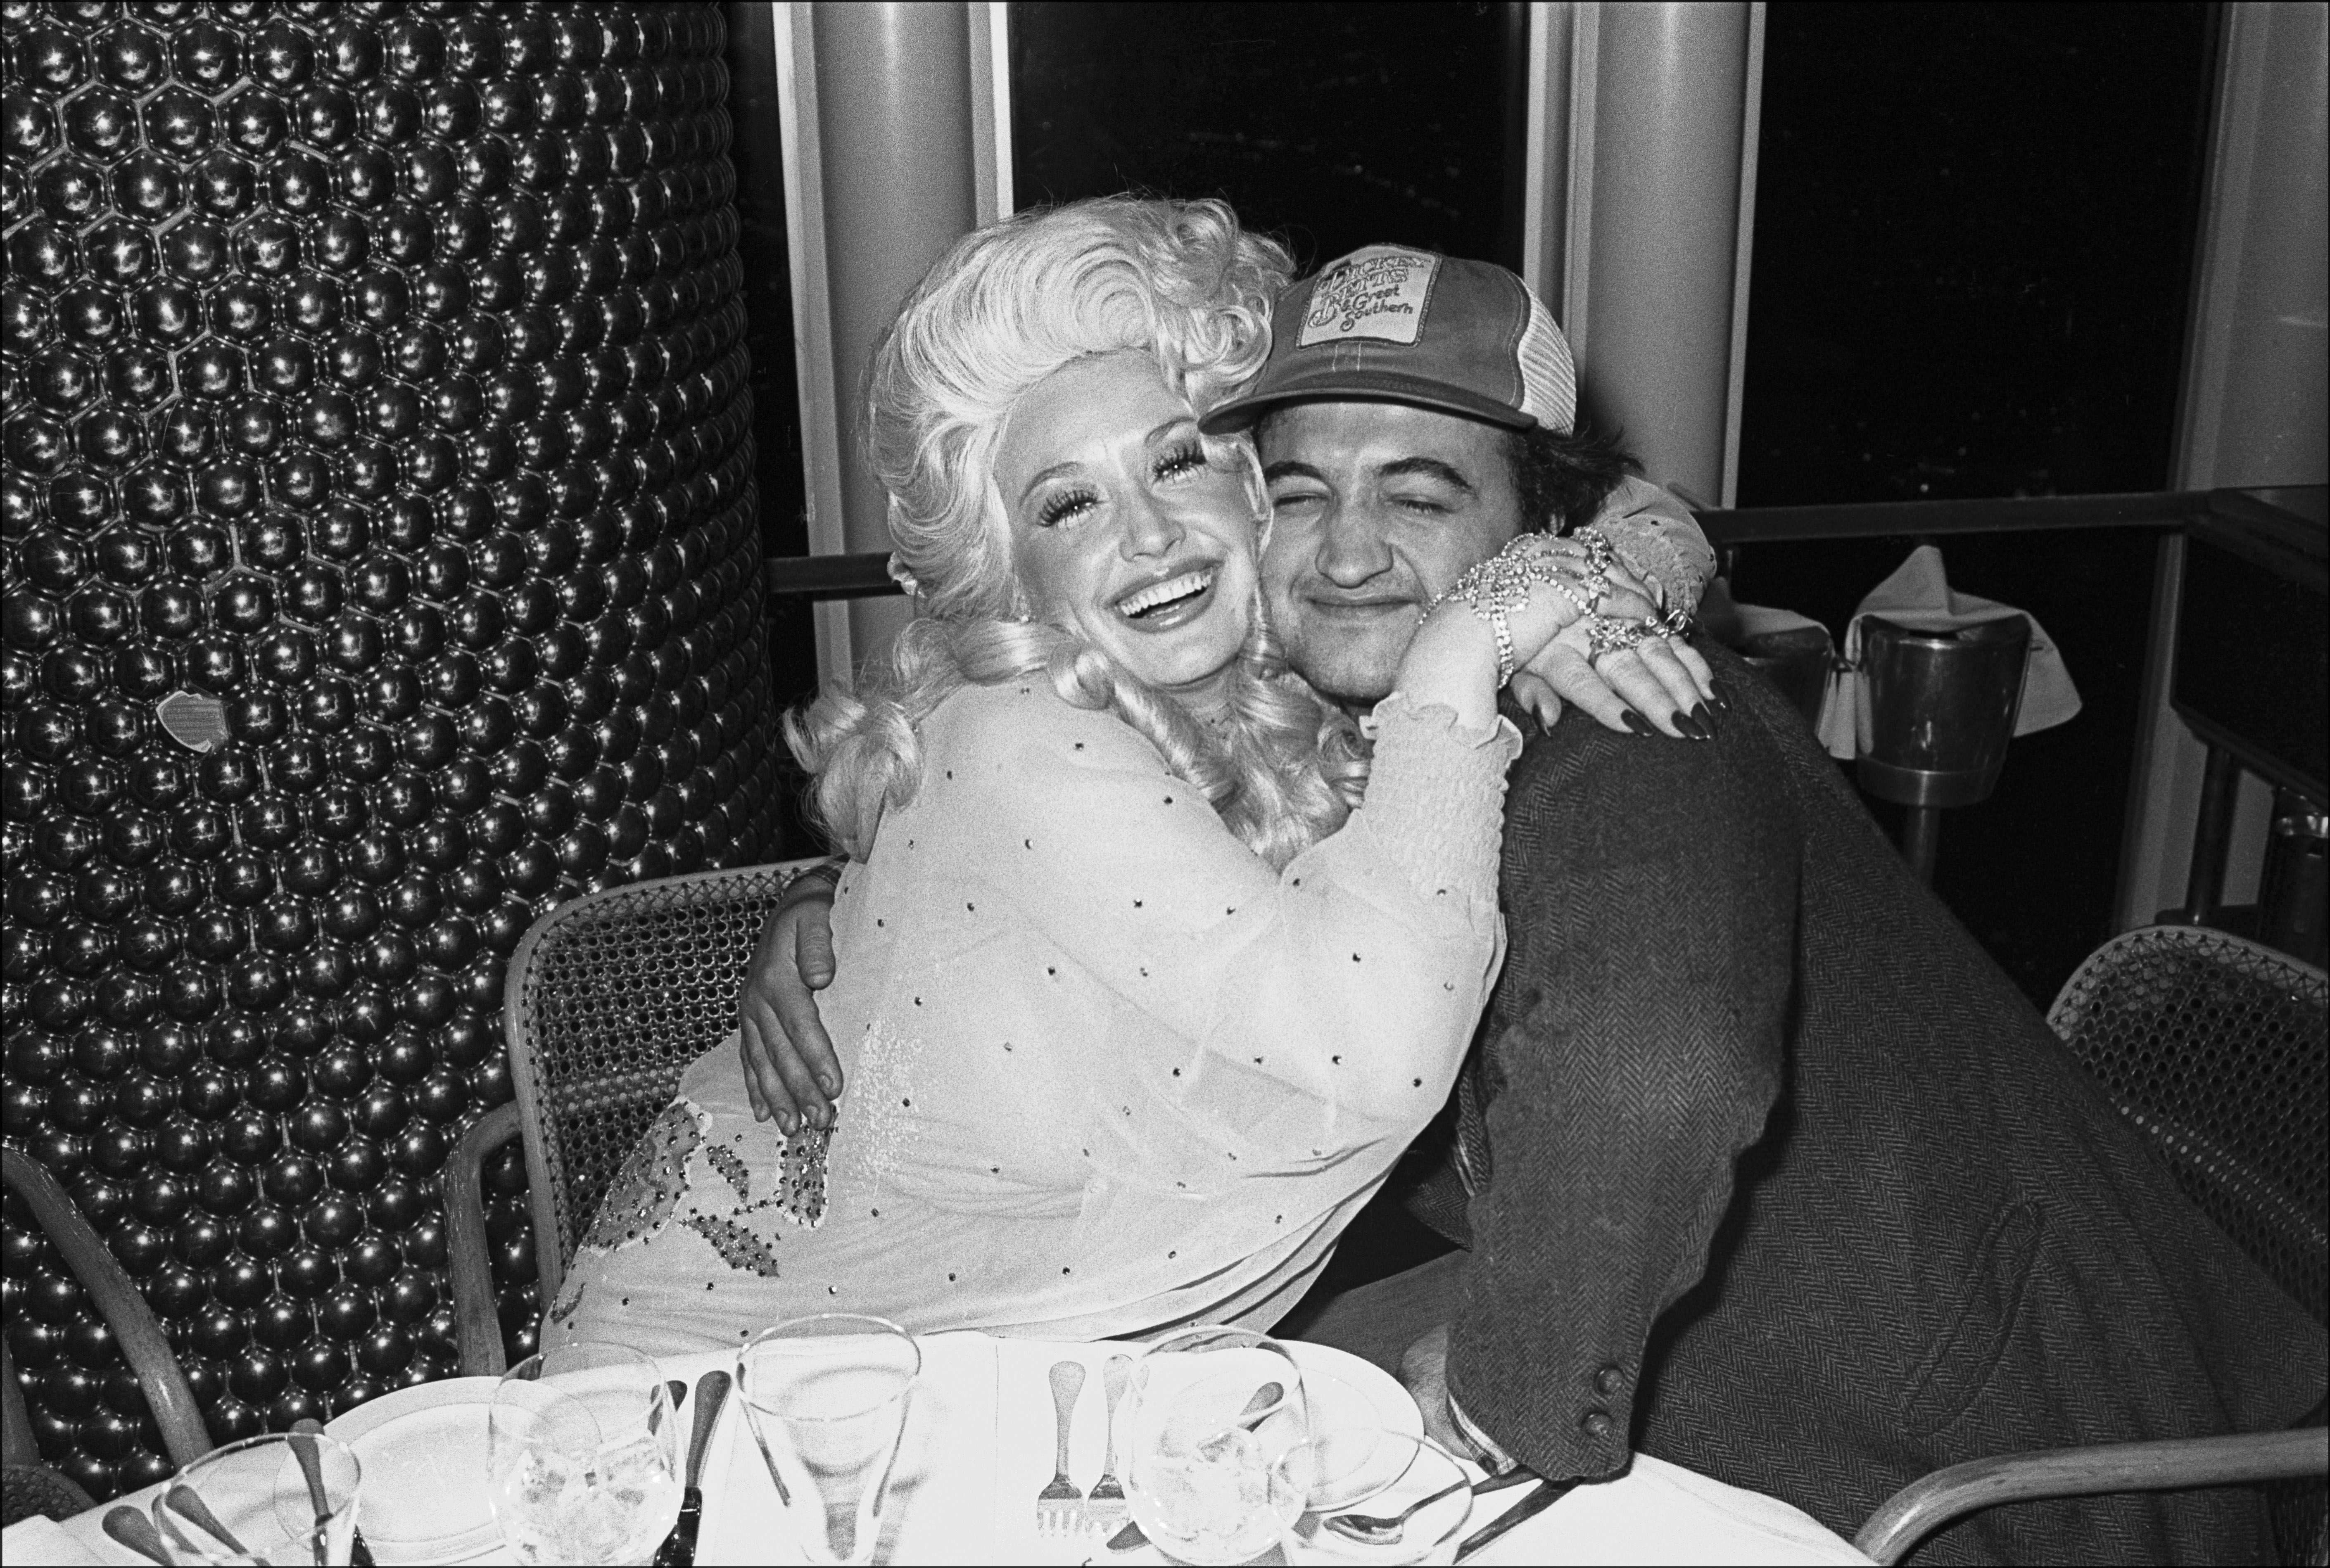 Dolly Parton and comedian John Belushi hug as they pose together at the Windows on the World restaurant.